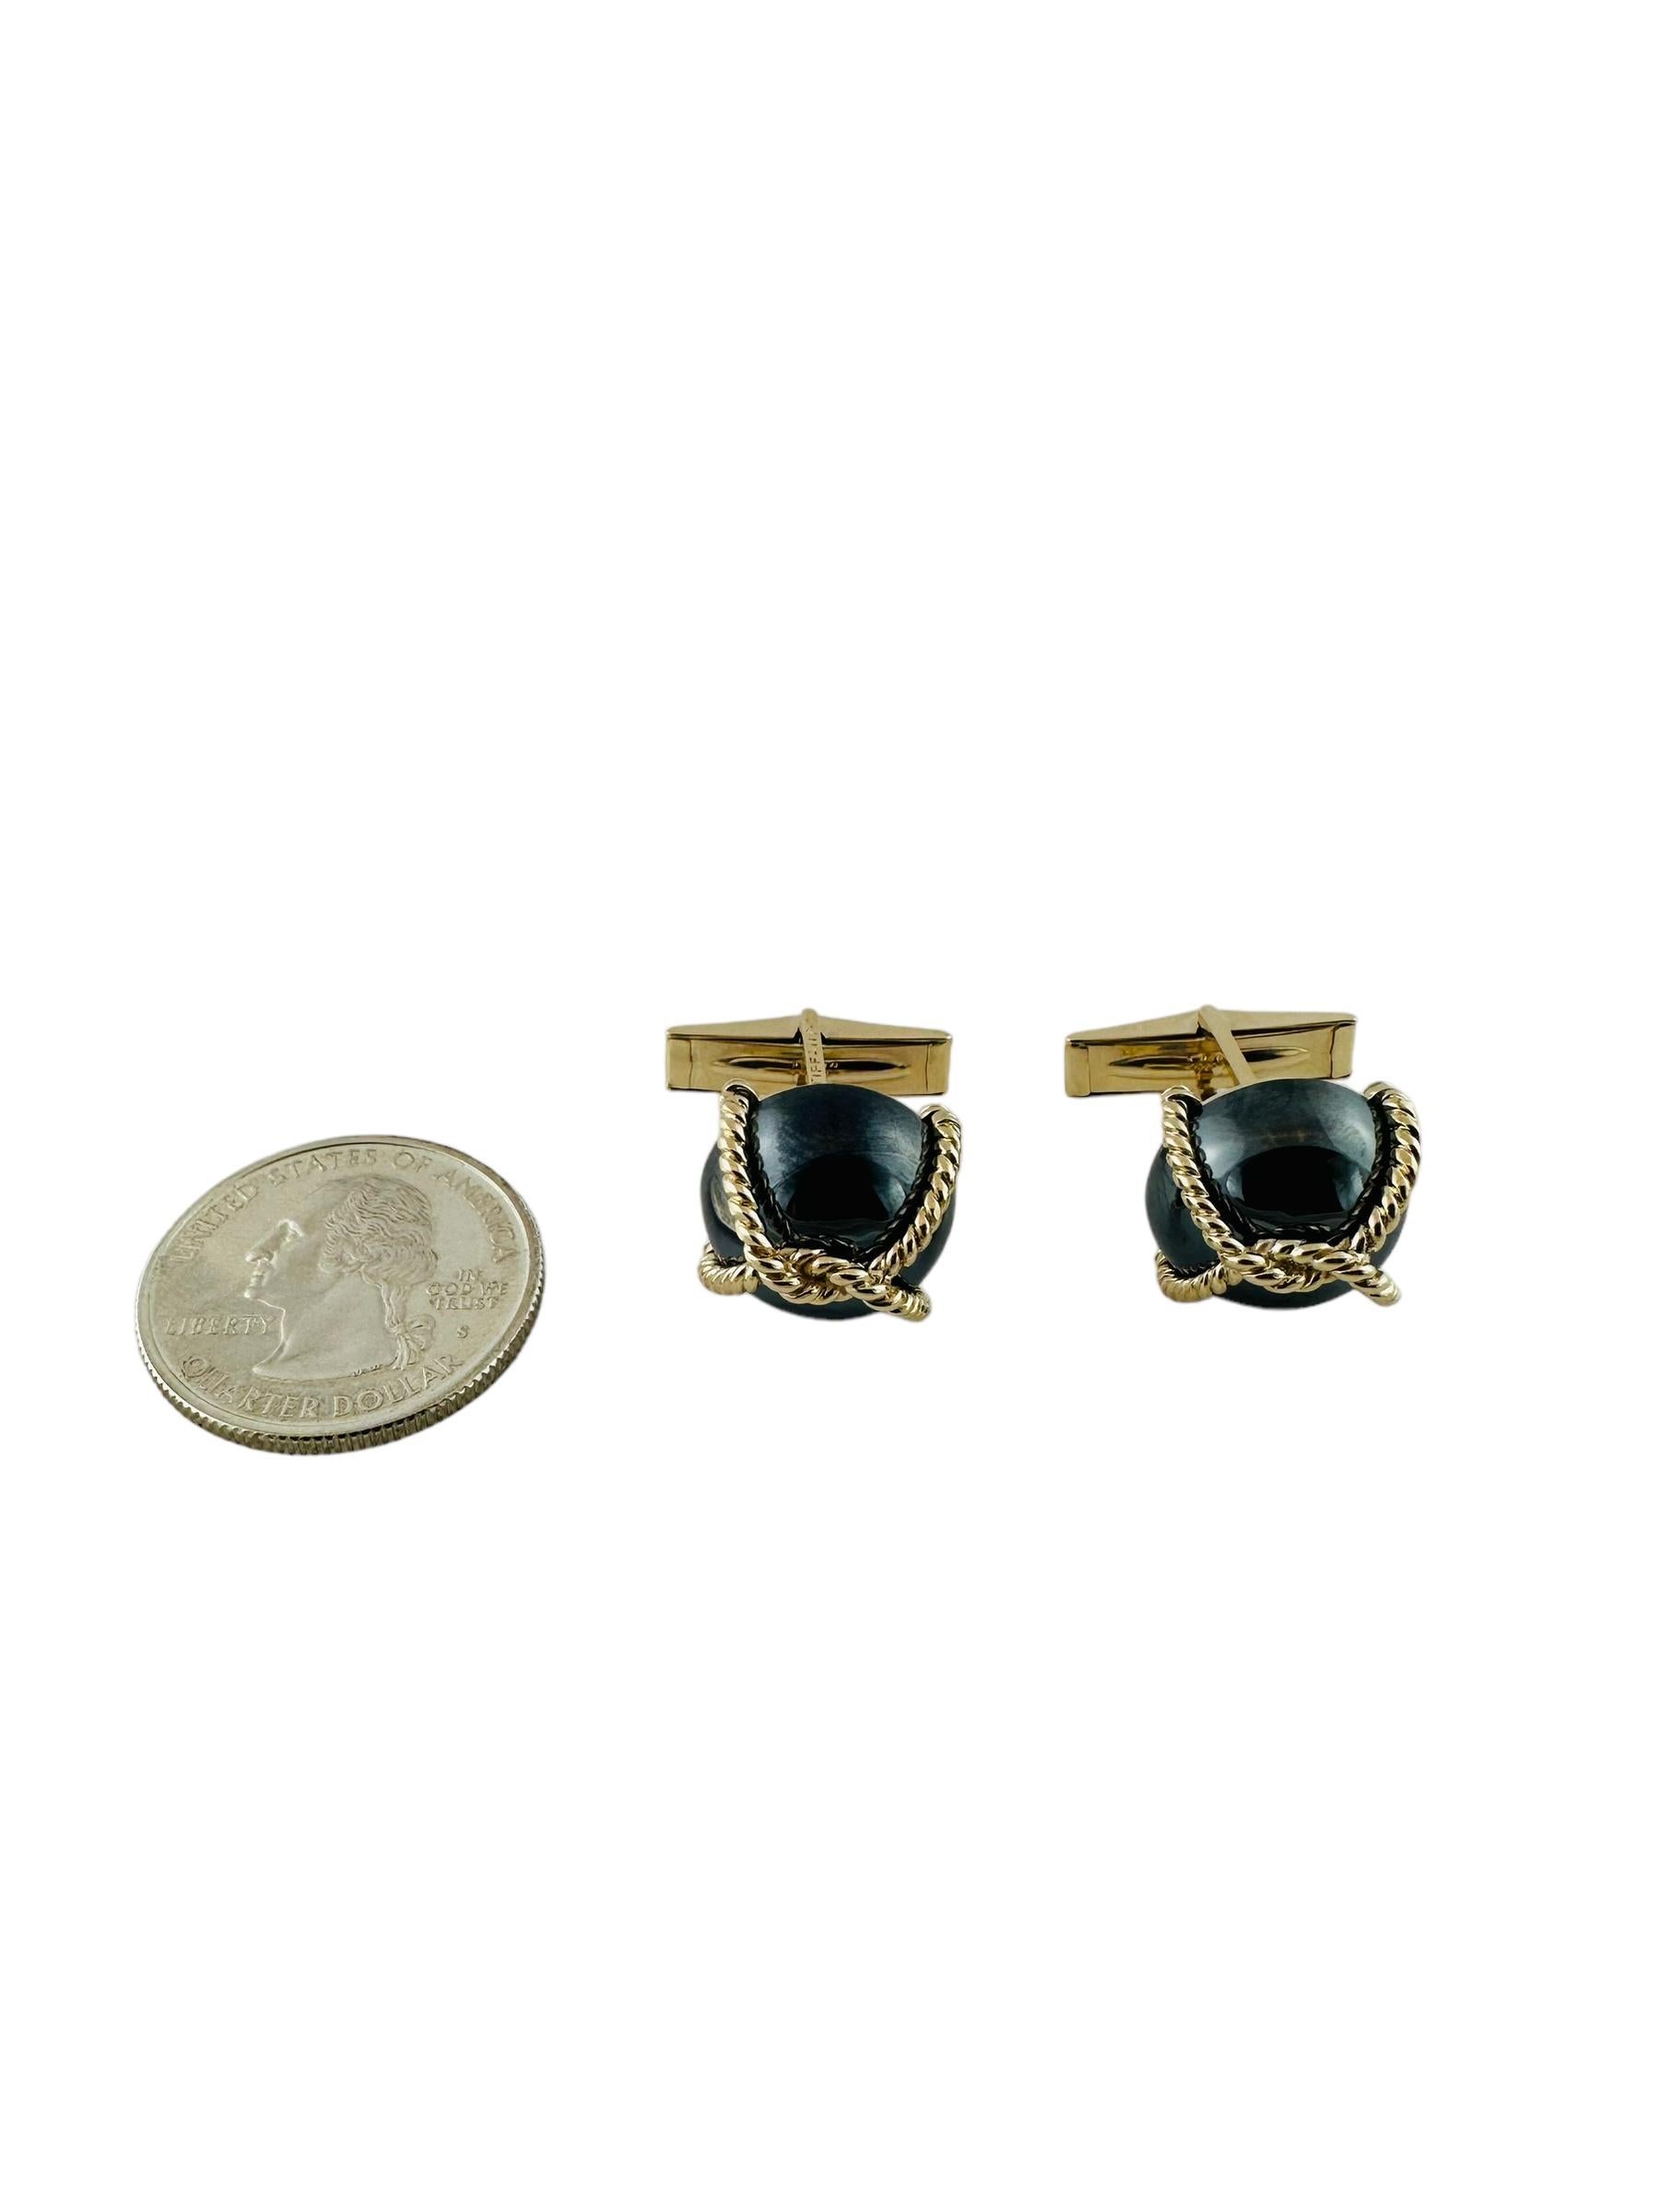 Vintage Tiffany & Co. 14K Yellow Gold Hematite Cable Cufflinks For Sale 5